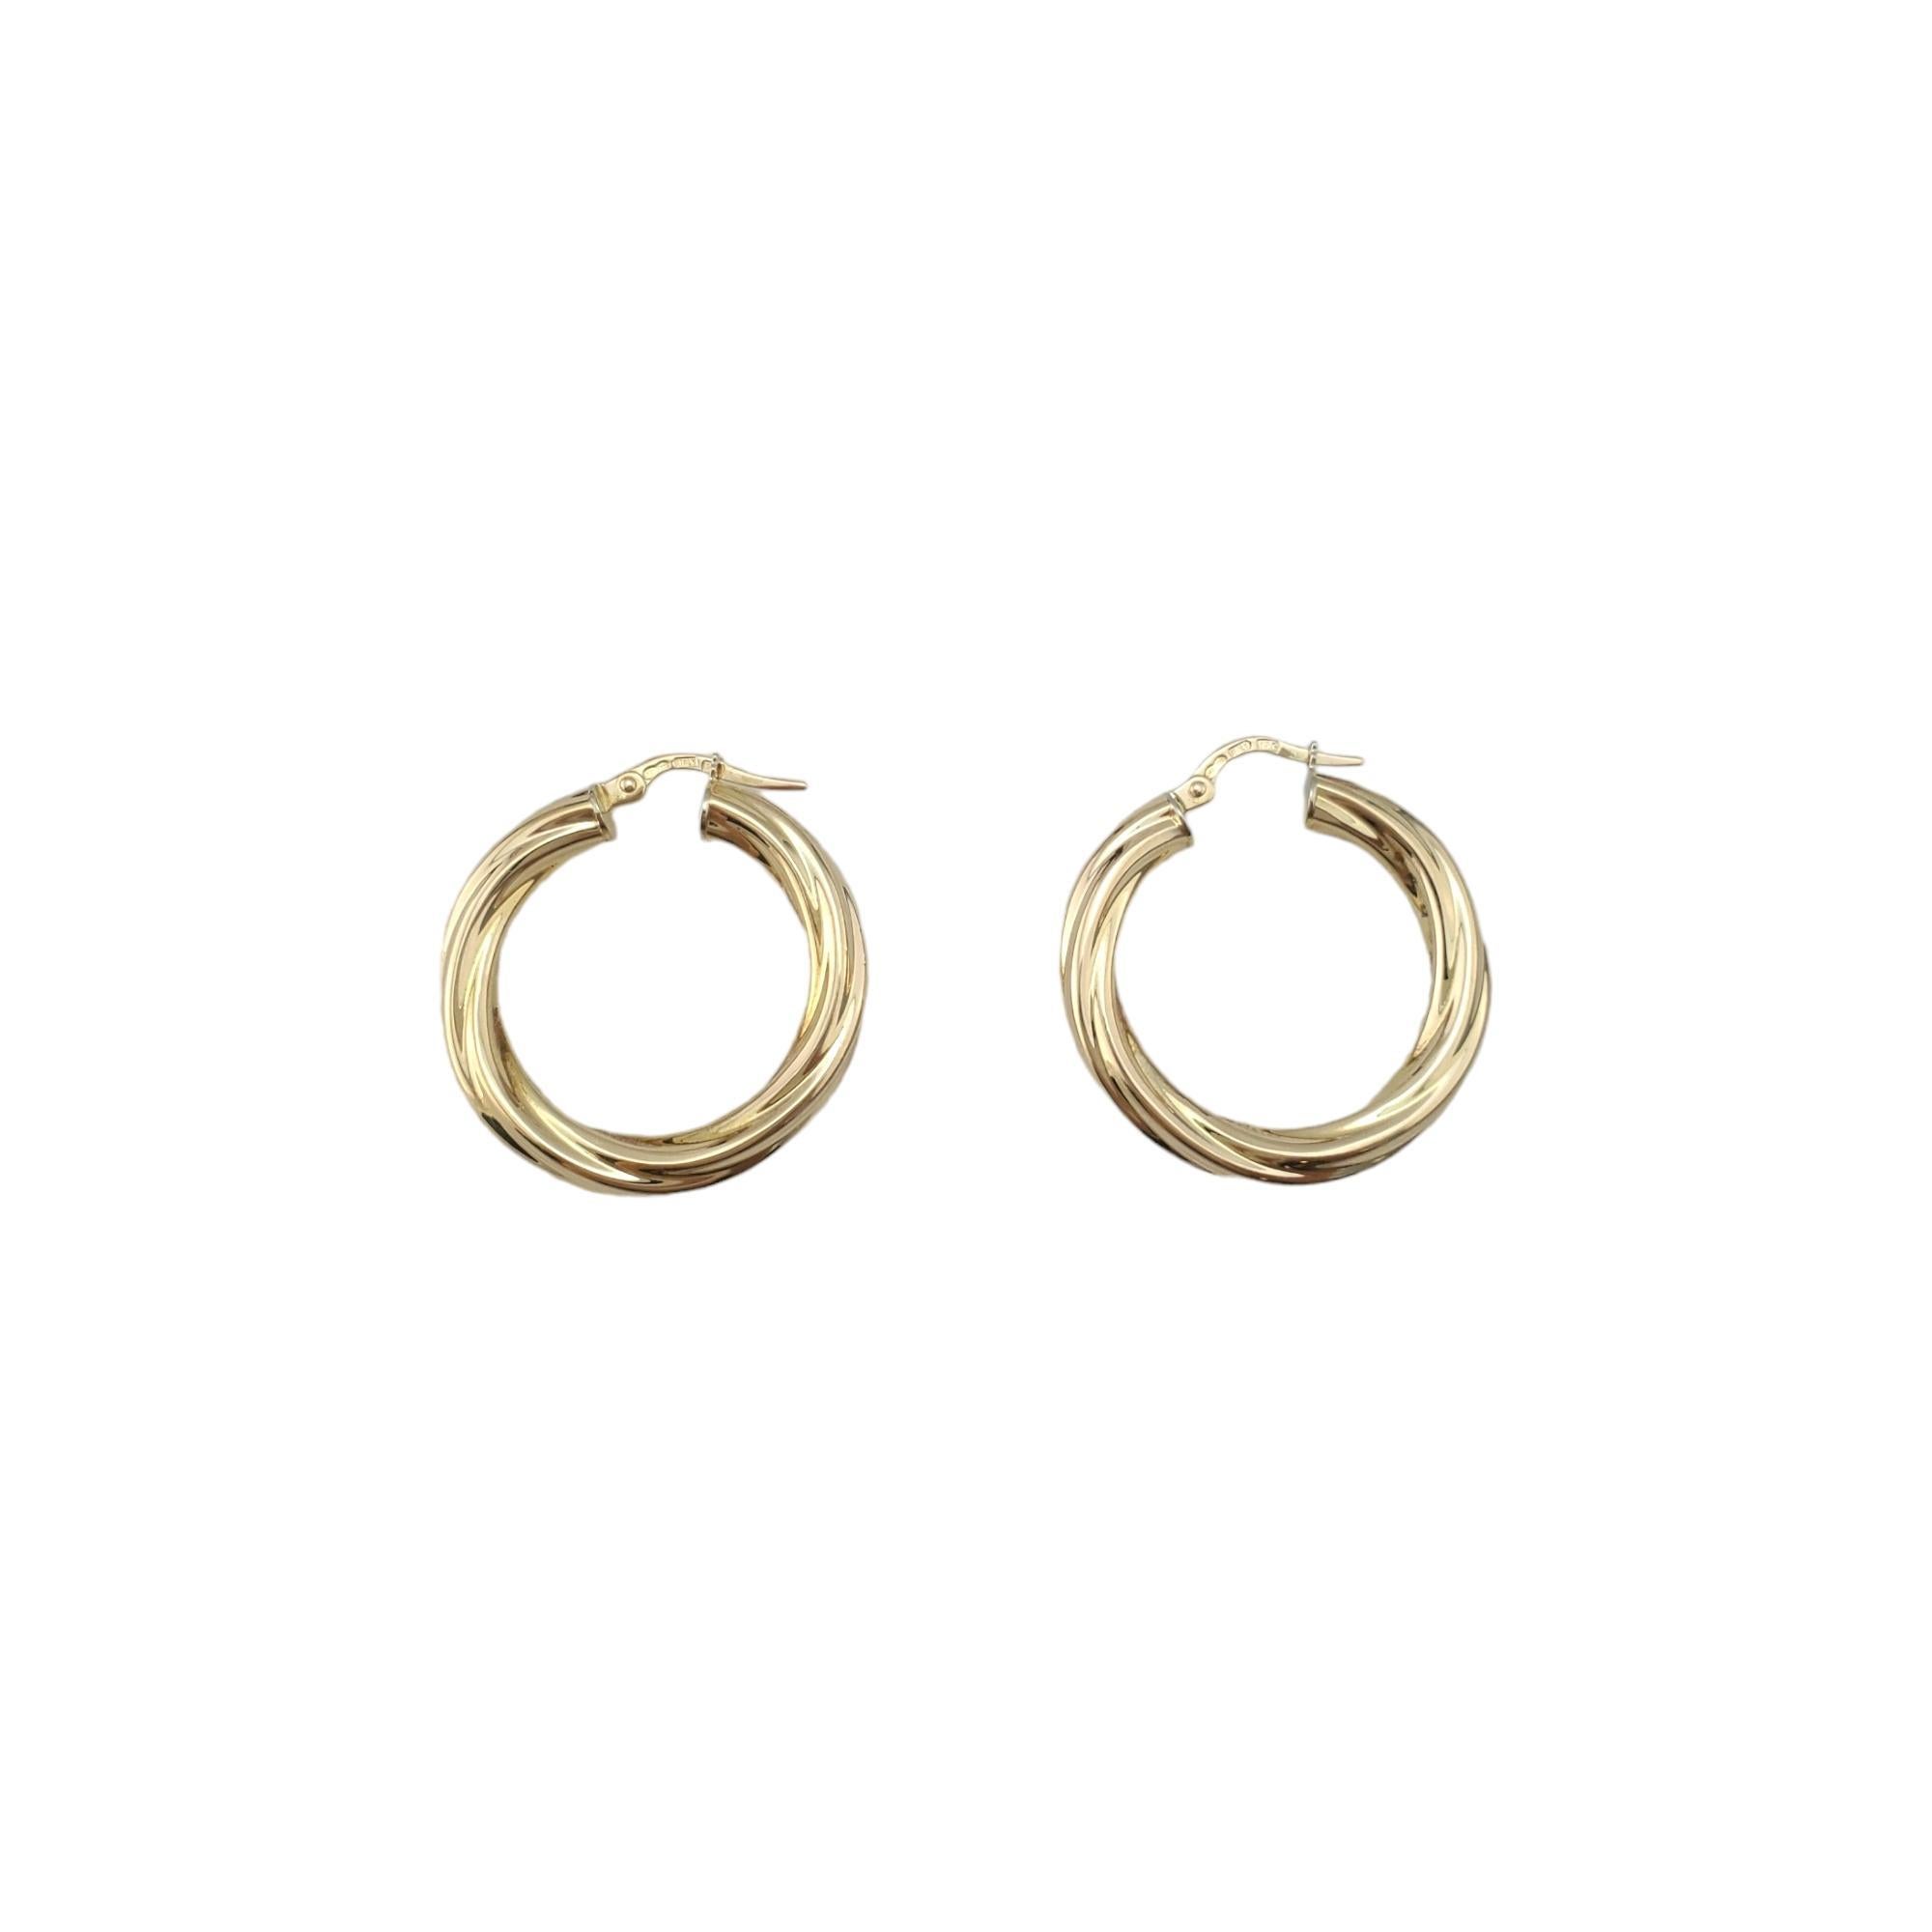 14K Yellow Gold Circular Twisted Hoop Earrings

Lovely twisted design hoop earrings in 14K yellow gold.

Hallmark: Italy 14K

Weight: 3.0 g/ 1.9 dwt.

Size: 29.0 mm X 3.7 mm X 3.8 mm

Very good condition, professionally polished.

Will come packaged